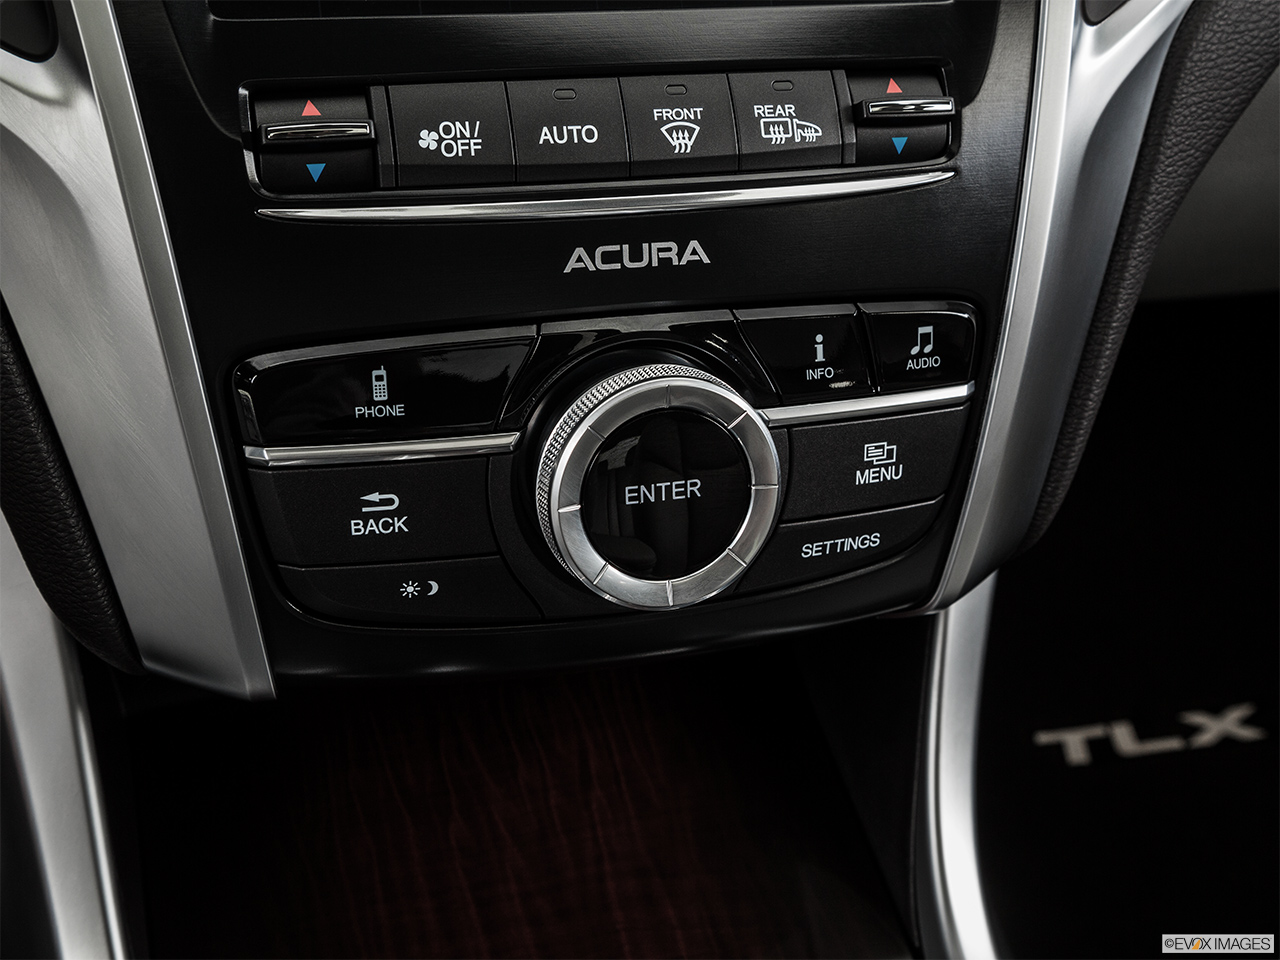 2016 Acura TLX 3.5 V-6 9-AT P-AWS System Controls. 